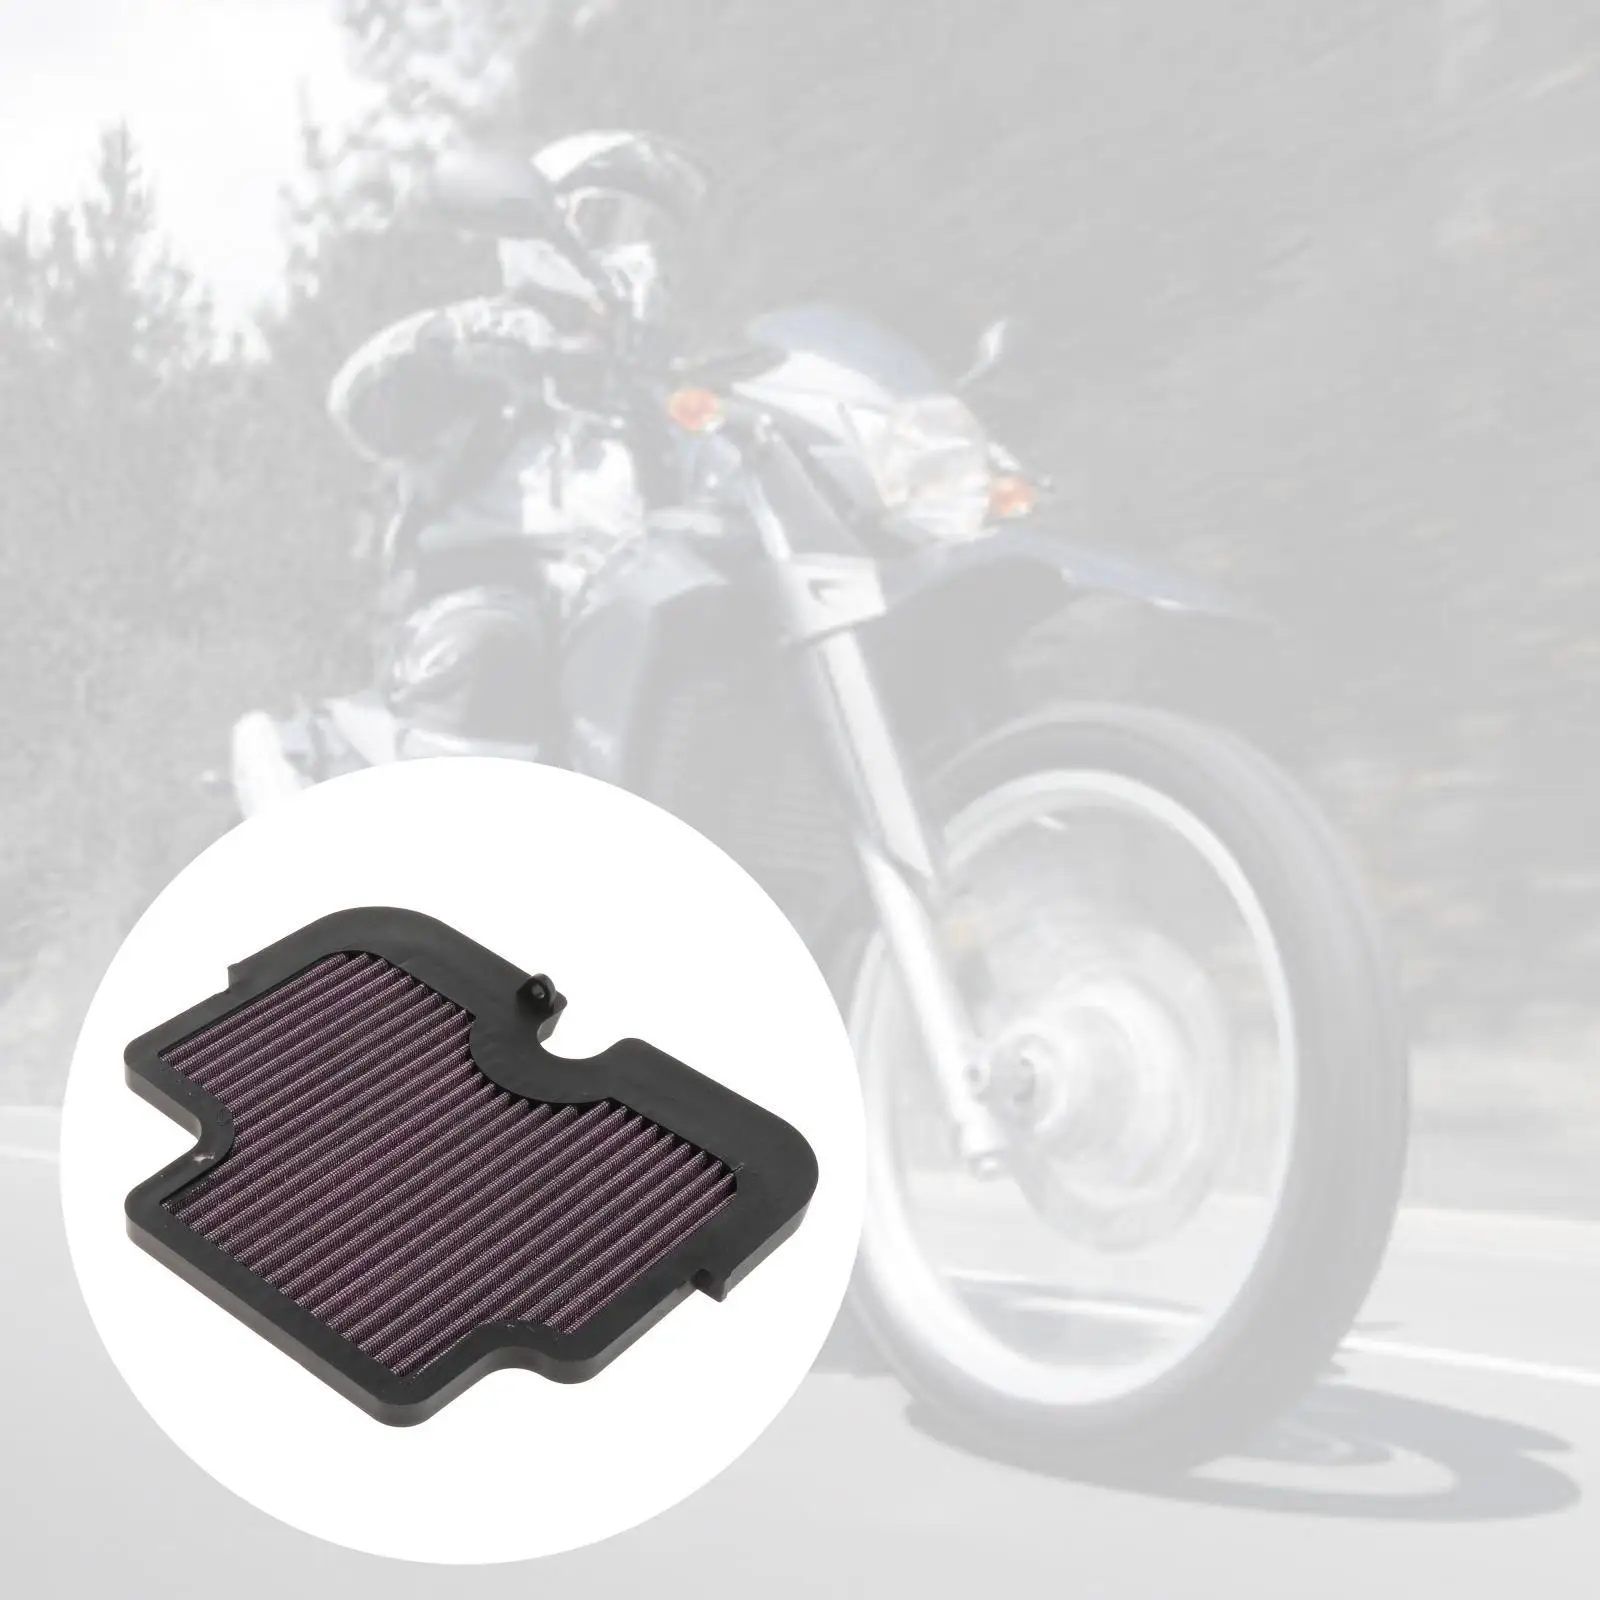 High Performance, Premium, , Air Filter Cleaner, Replacement Fits for ER6N ER6F Accessories Motorcycle Parts